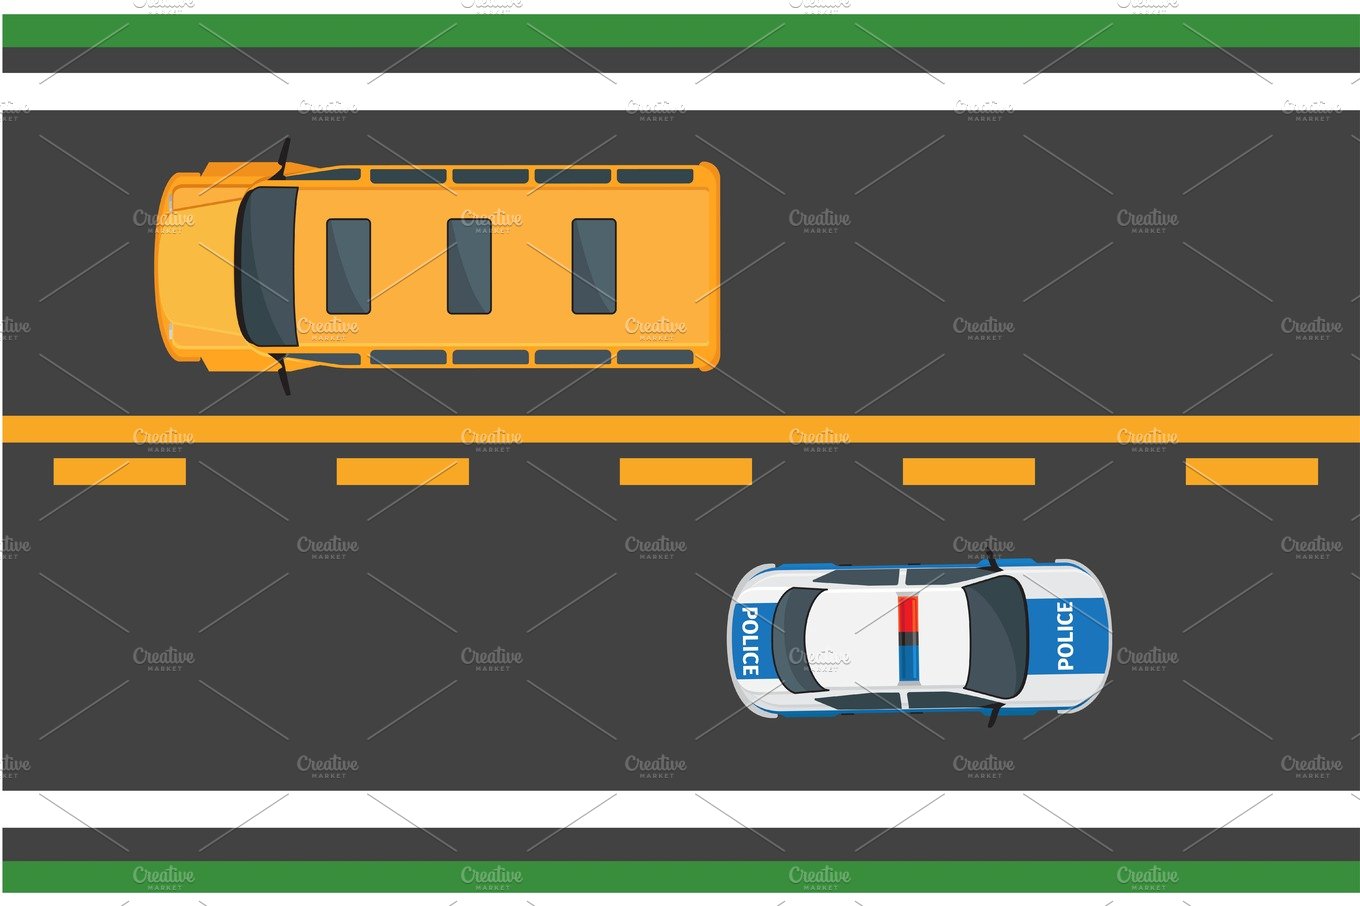 City Traffic Vector Concept with Cars on Highway cover image.